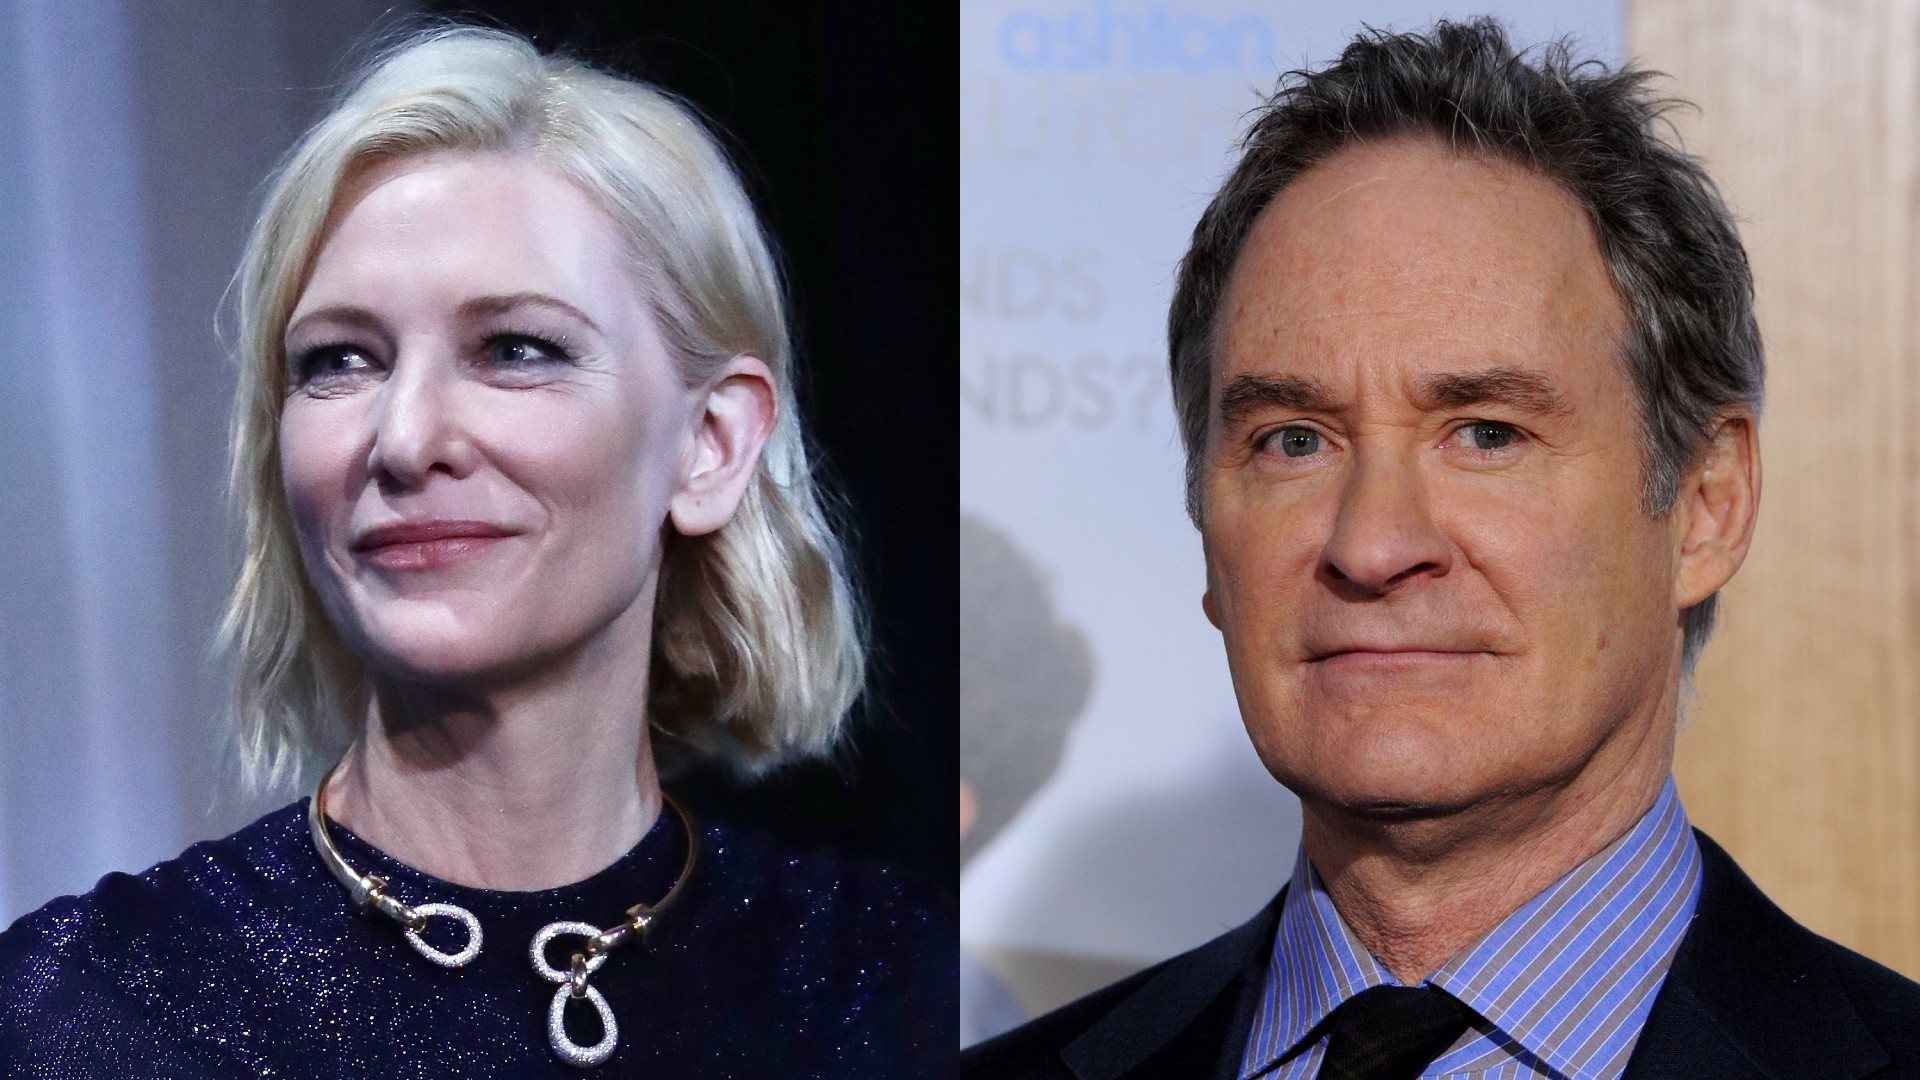 Cate Blanchett and Kevin Kline Set to Star in 'Disclaimer', New Thriller Series From 'Roma' Director Alfonso Cuarón